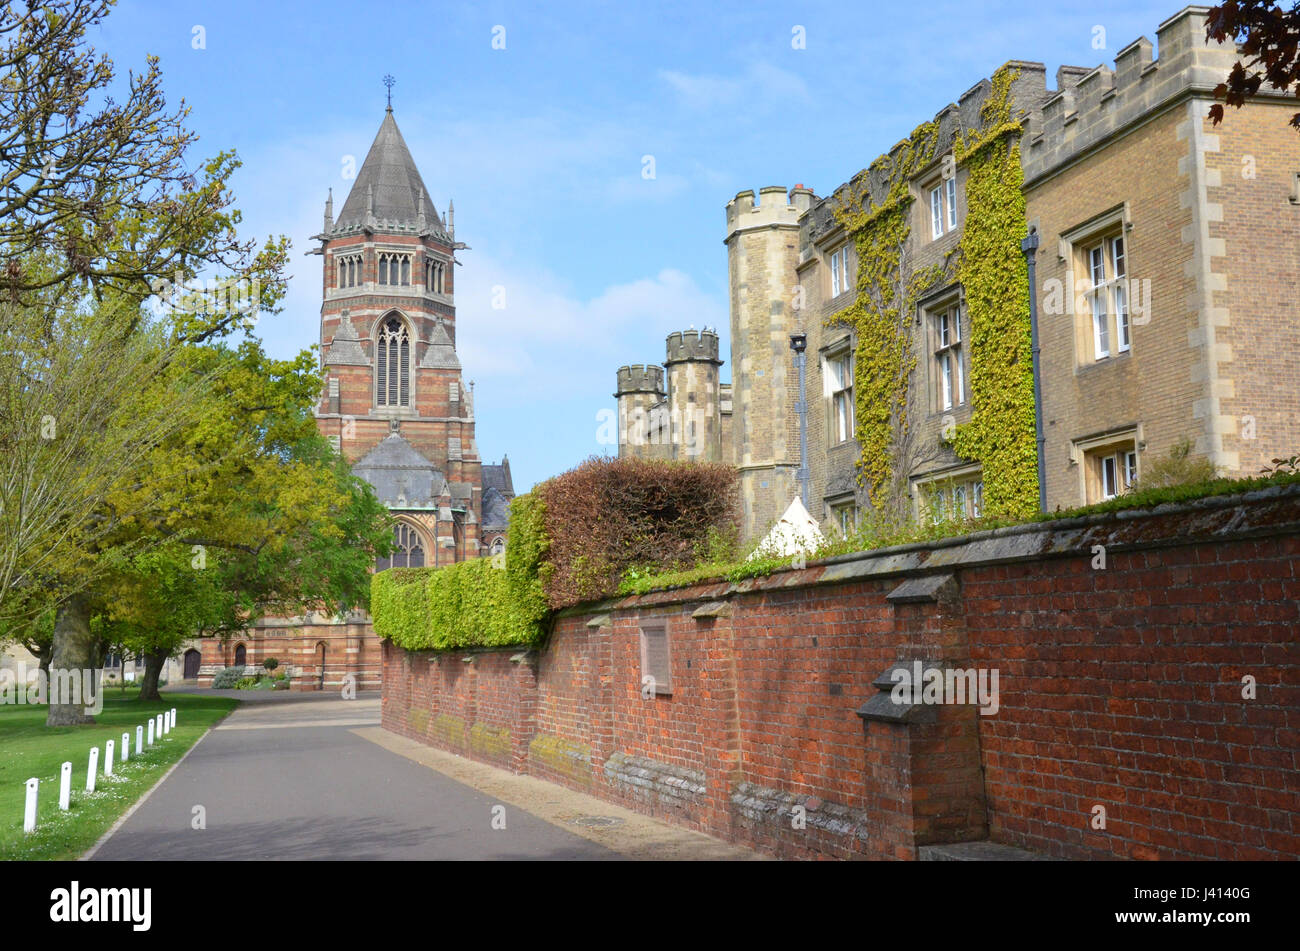 The chapels and school house at Rugby School, Warwickshire, England Stock Photo